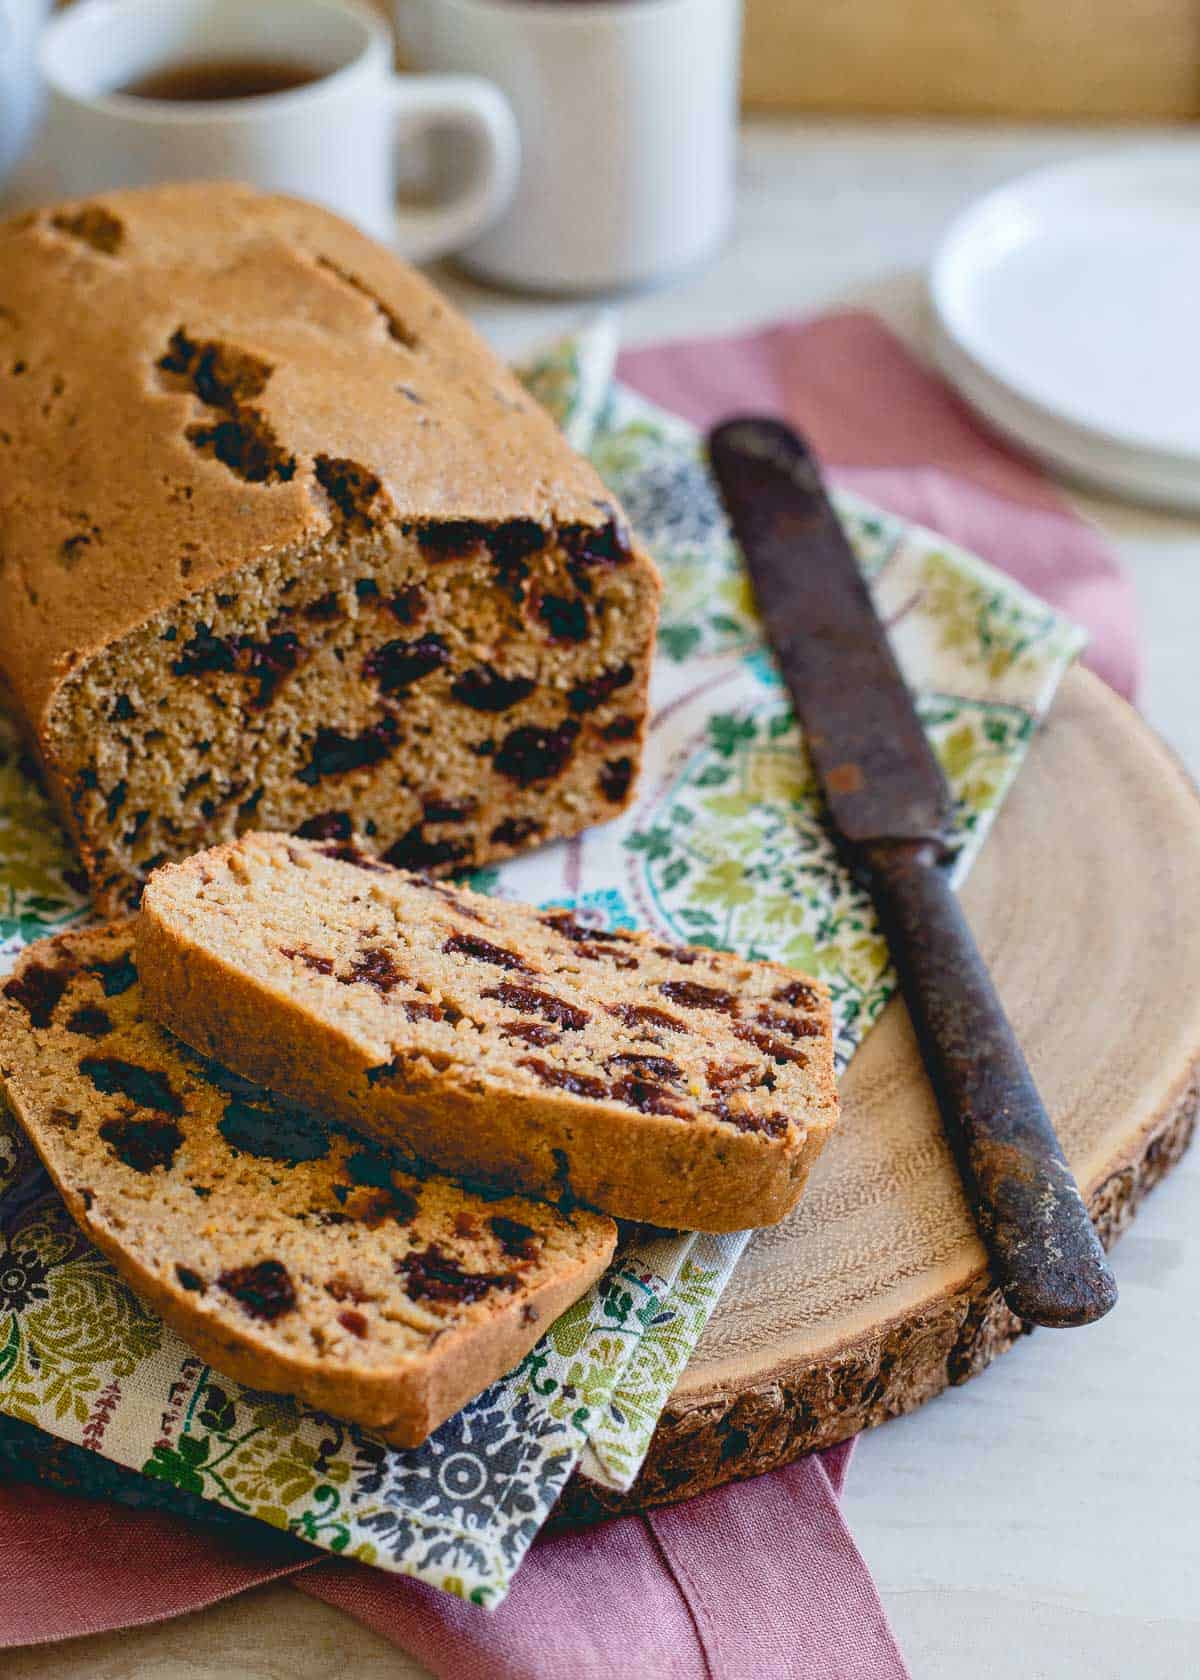 Montmorency cherries are soaked in tea and studded throughout this simple cherry tea bread. Makes for a great afternoon snack!